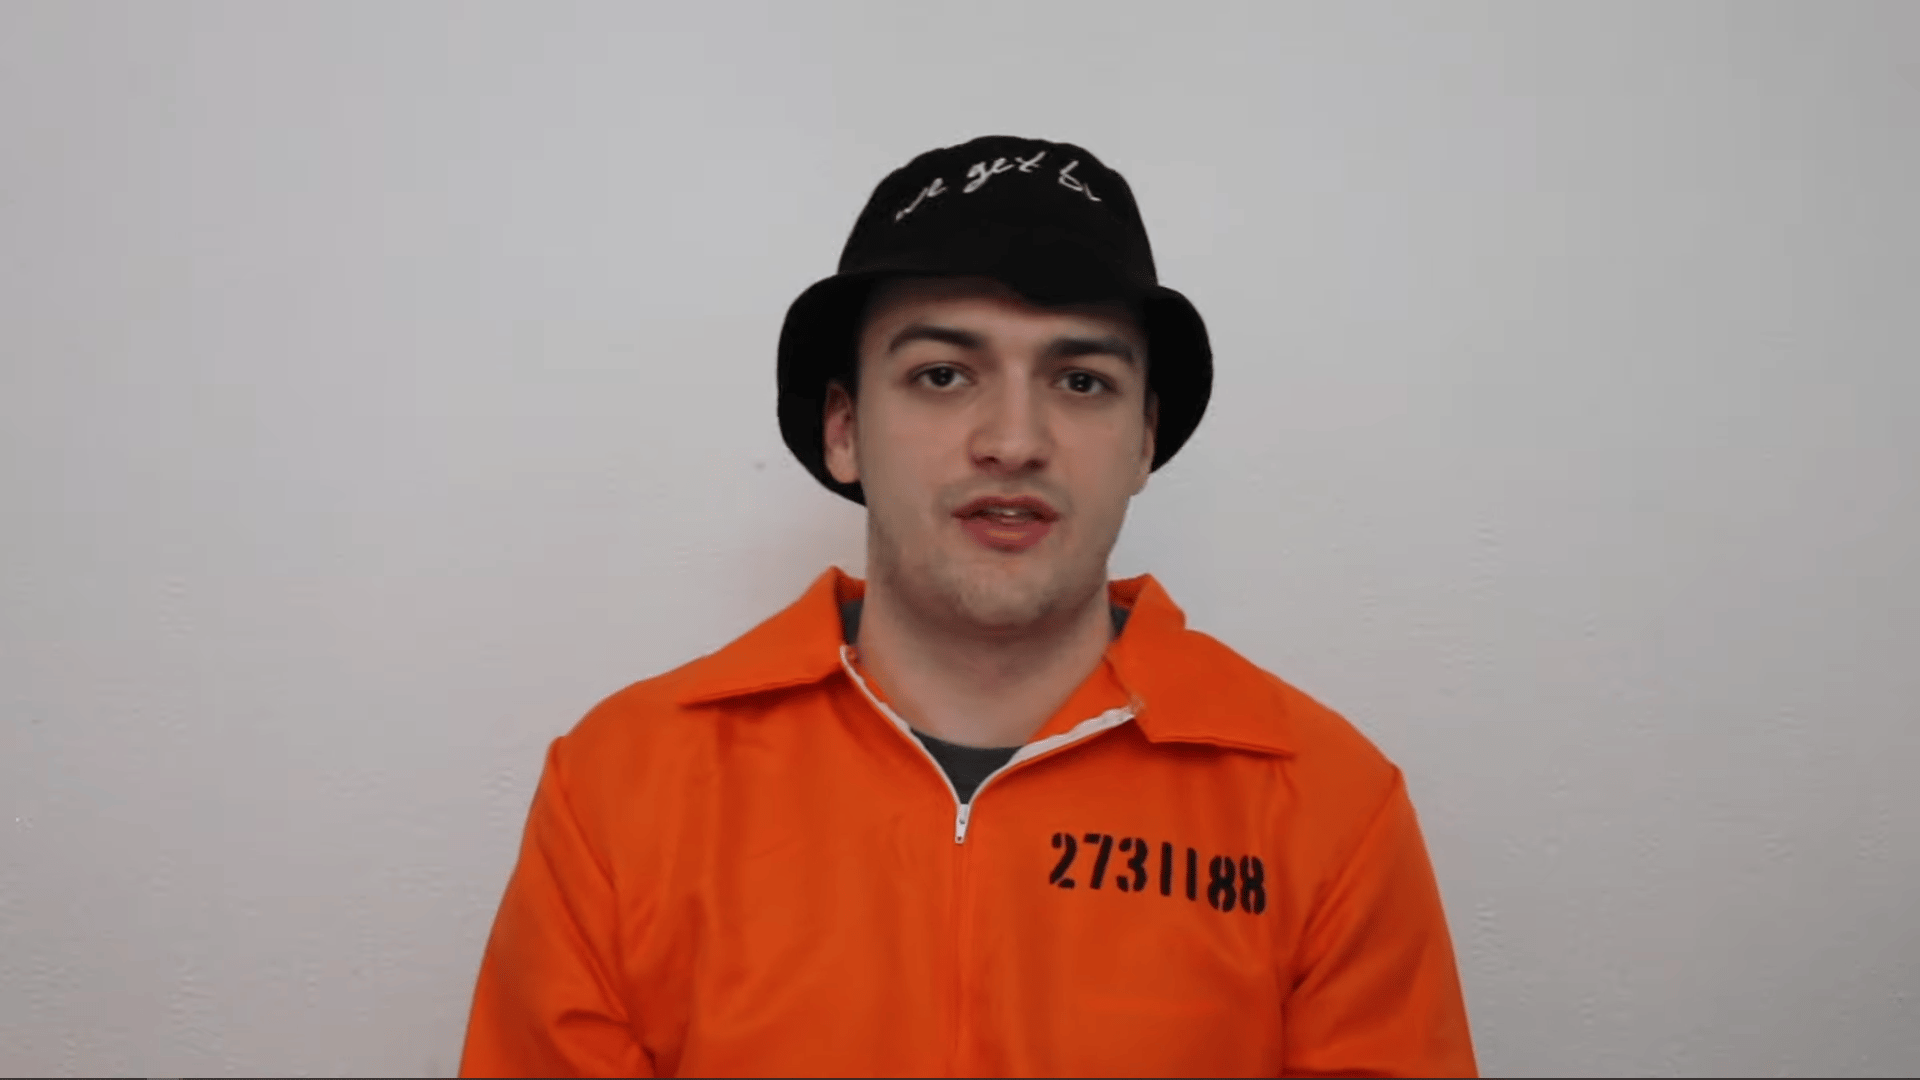 Harry Hesketh in prison outfit